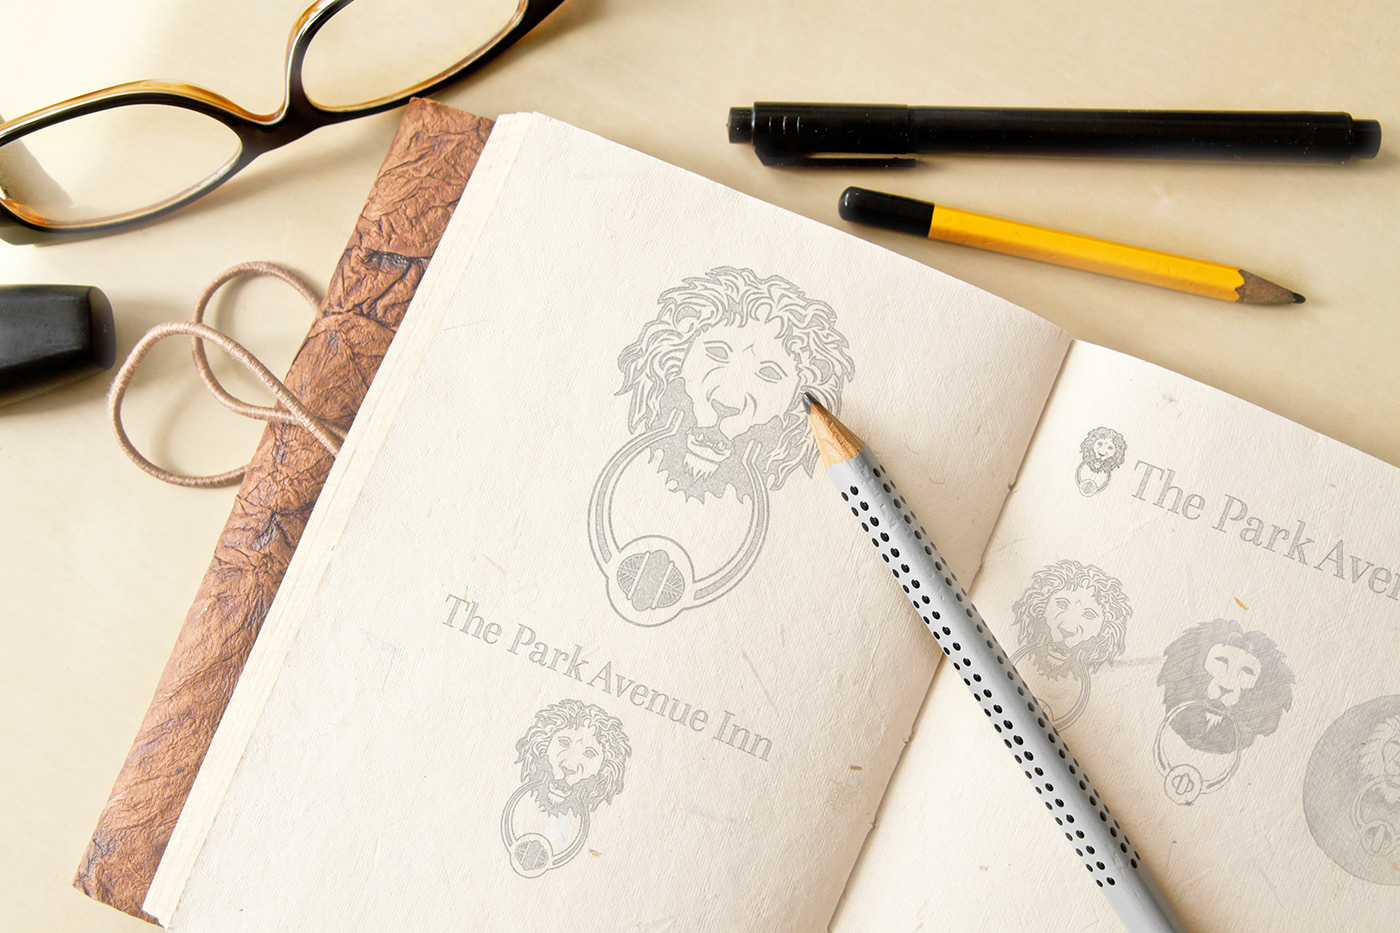 Show the sketching process for a logo.